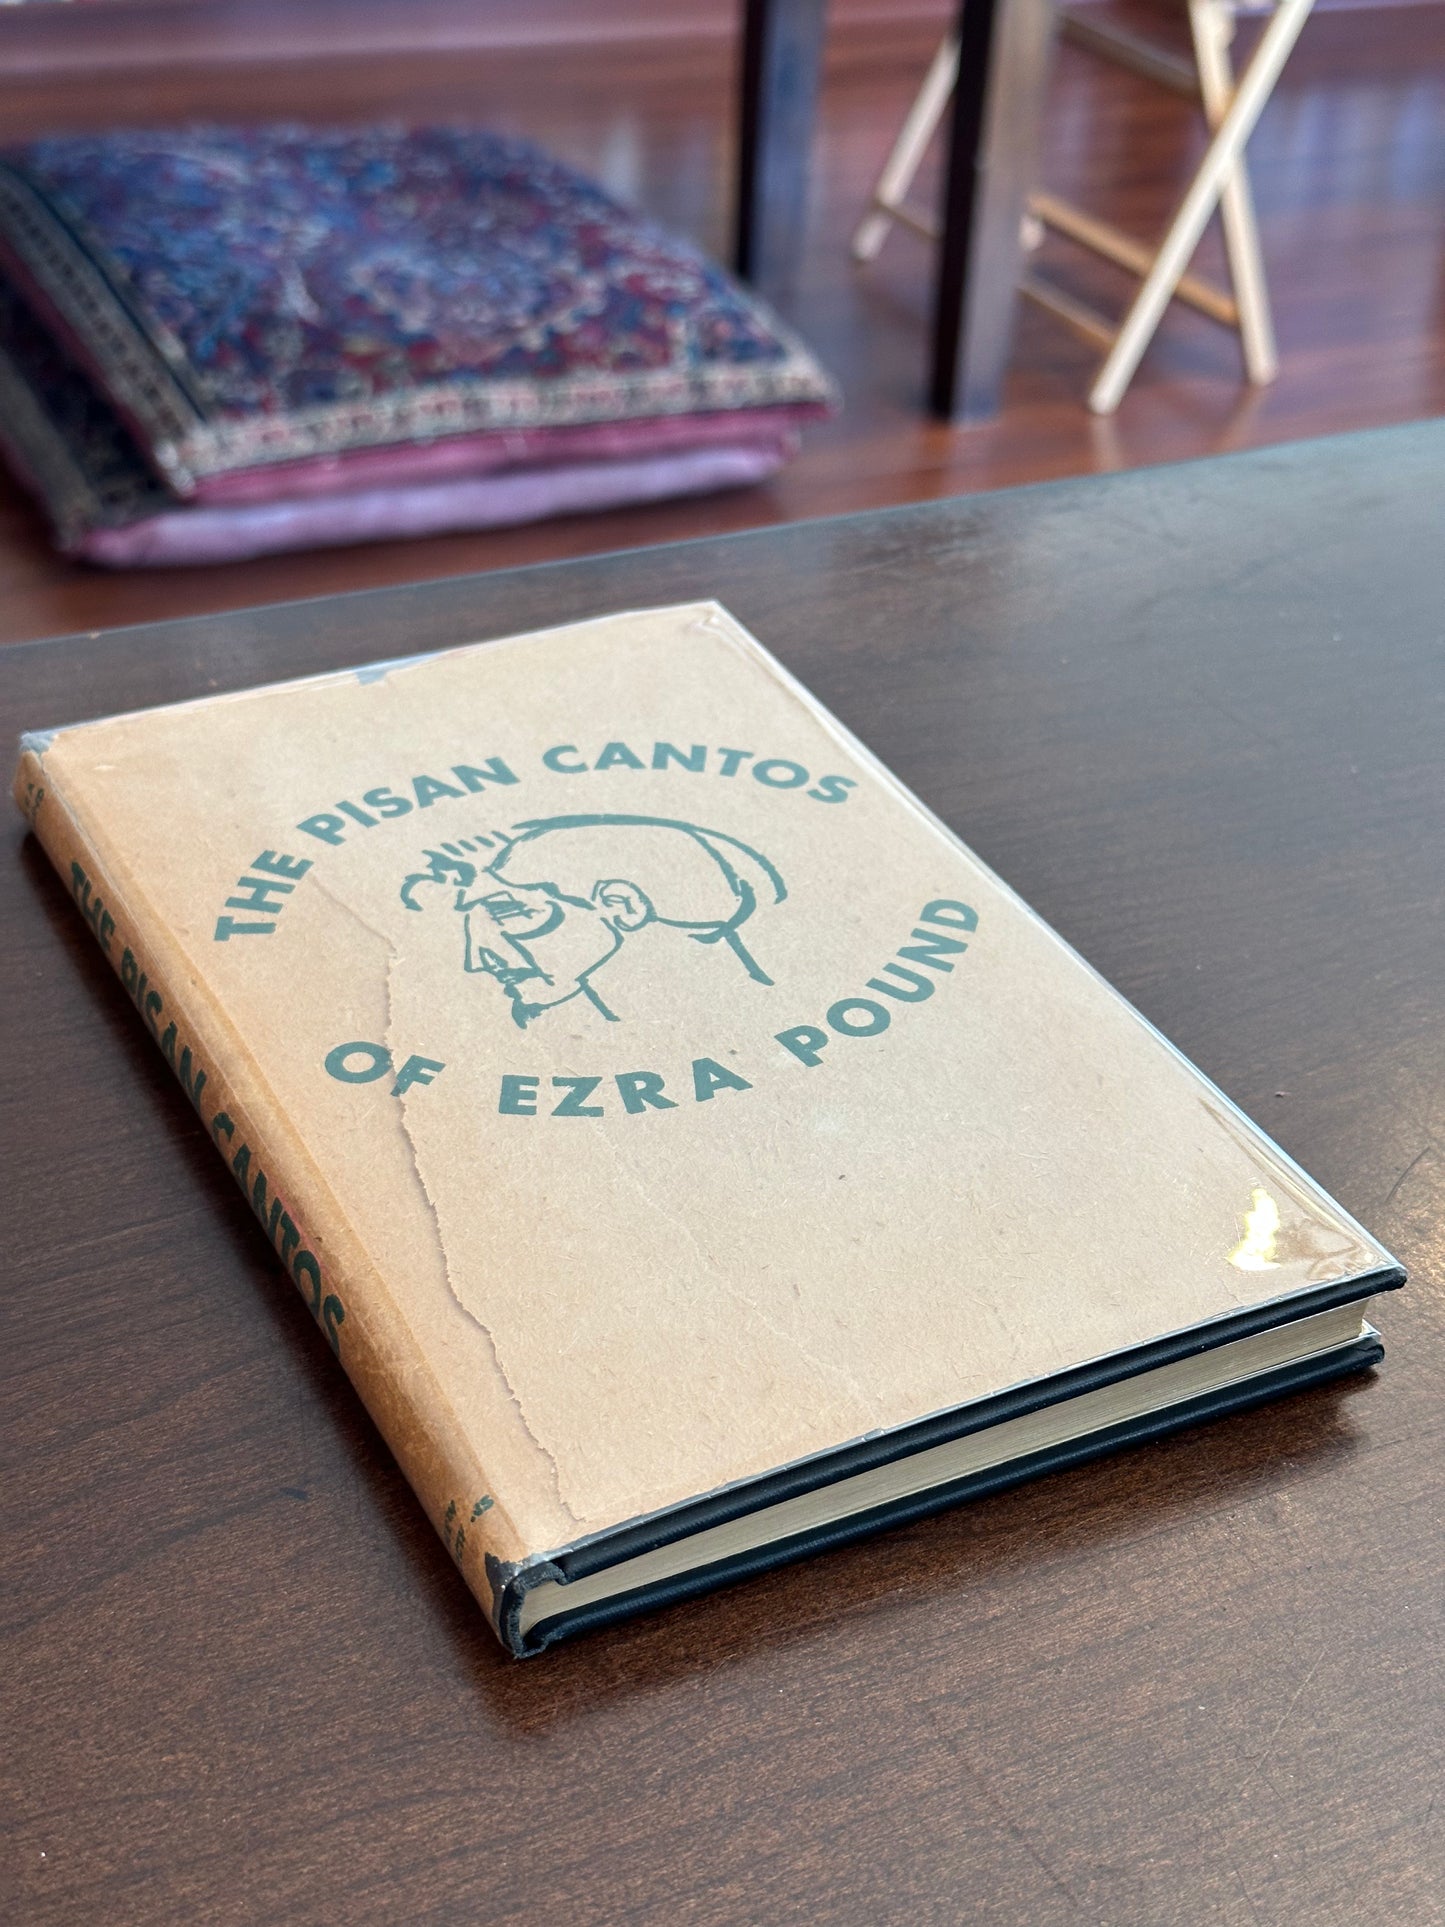 The Pisan Cantos by Ezra Pound (First Edition)